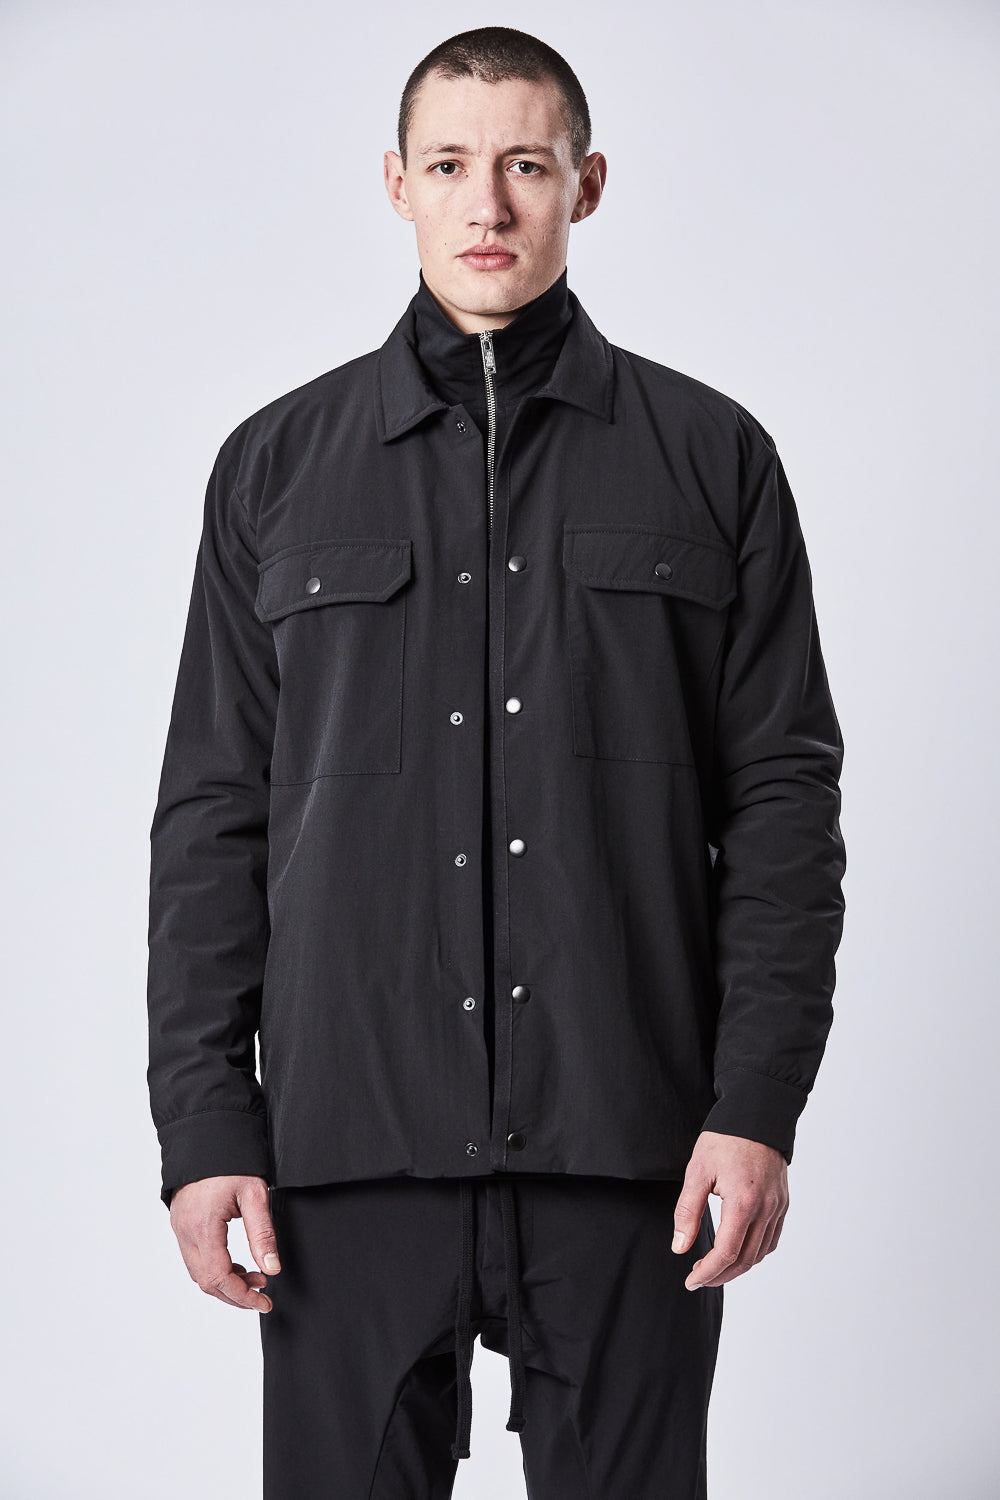 Buy the Thom Krom M SJ 611 Jacket in Black at Intro. Spend £50 for free UK delivery. Official stockists. We ship worldwide.